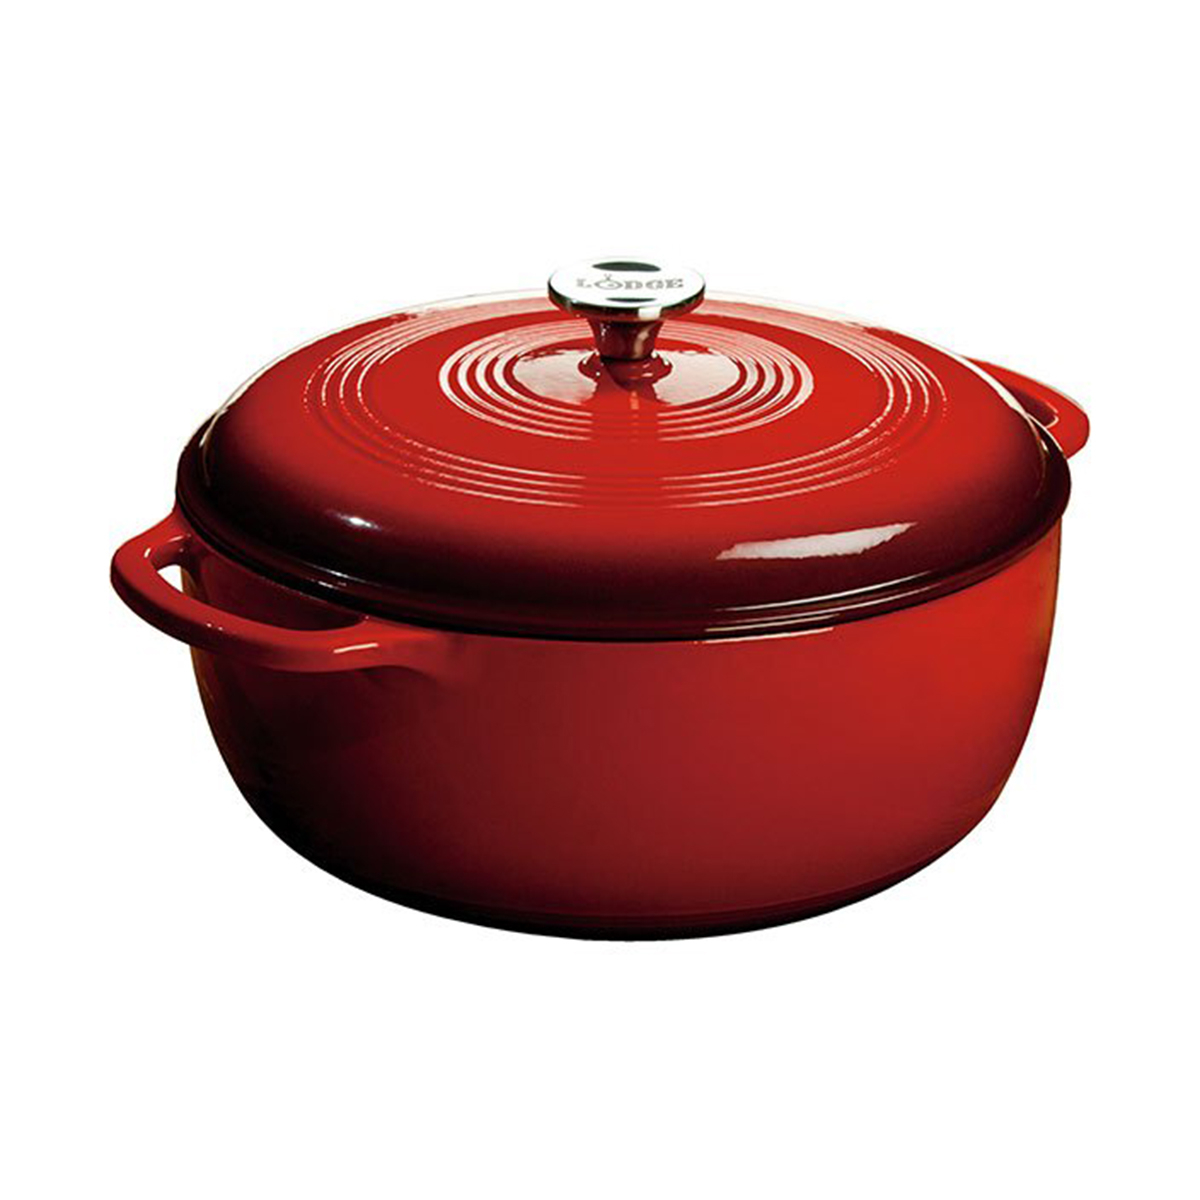 Enamelled Cast Iron Dutch Oven (6.68 lt), Red - Lodge® 